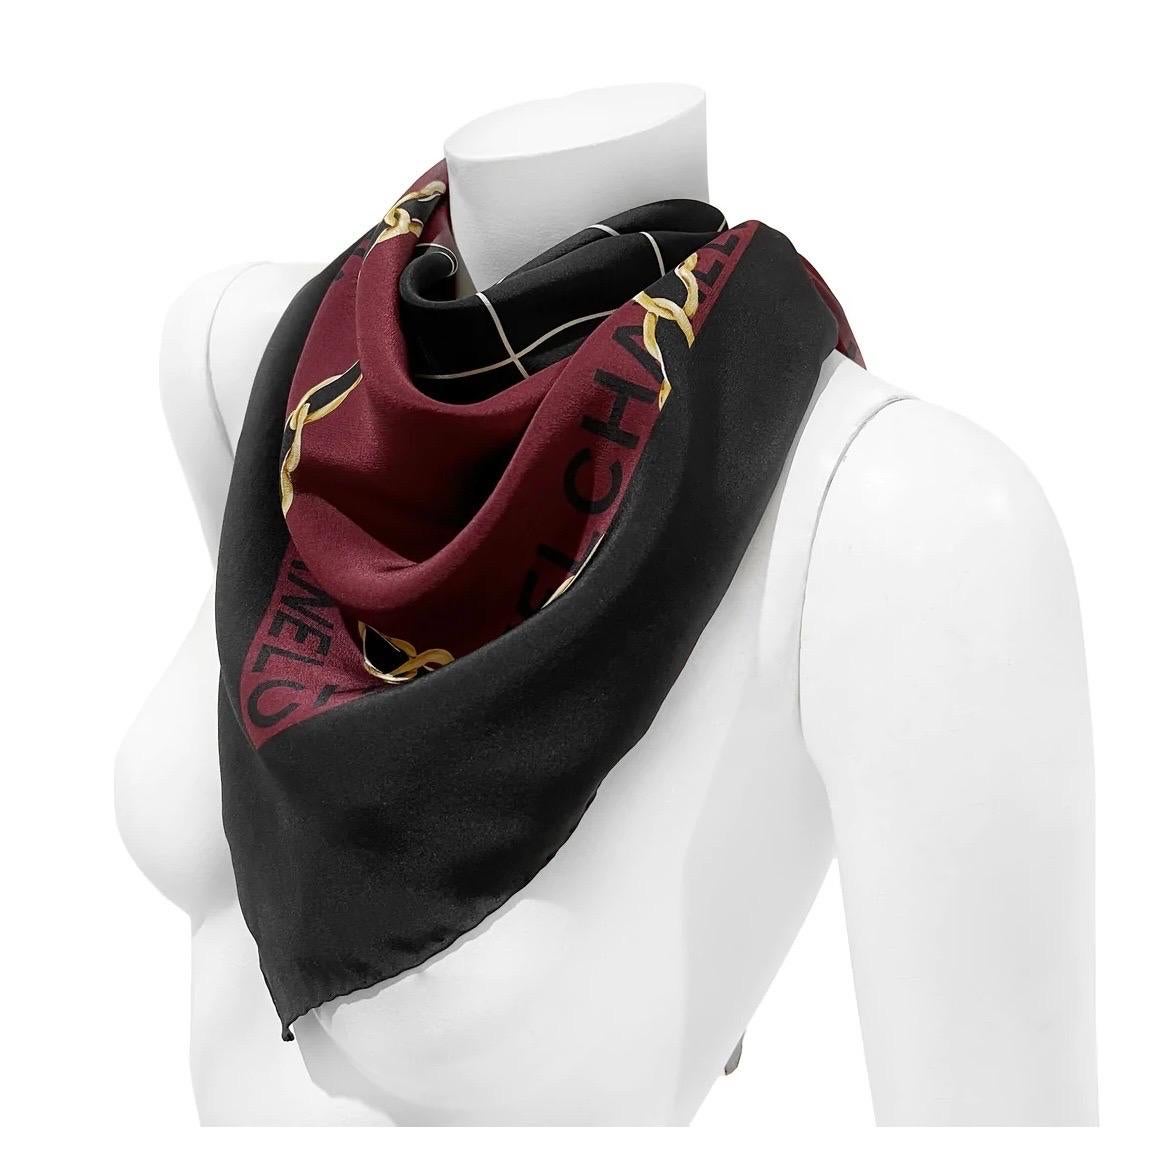 Silk 'Handbag' Print Scarf by Chanel 
Fall 2019
Made in Italy
Black/maroon 
Black handbag with gold chain print detail
Chanel logo detail around scarf
100% Silk
Excellent Condition; little to no visible use throughout scarf (see